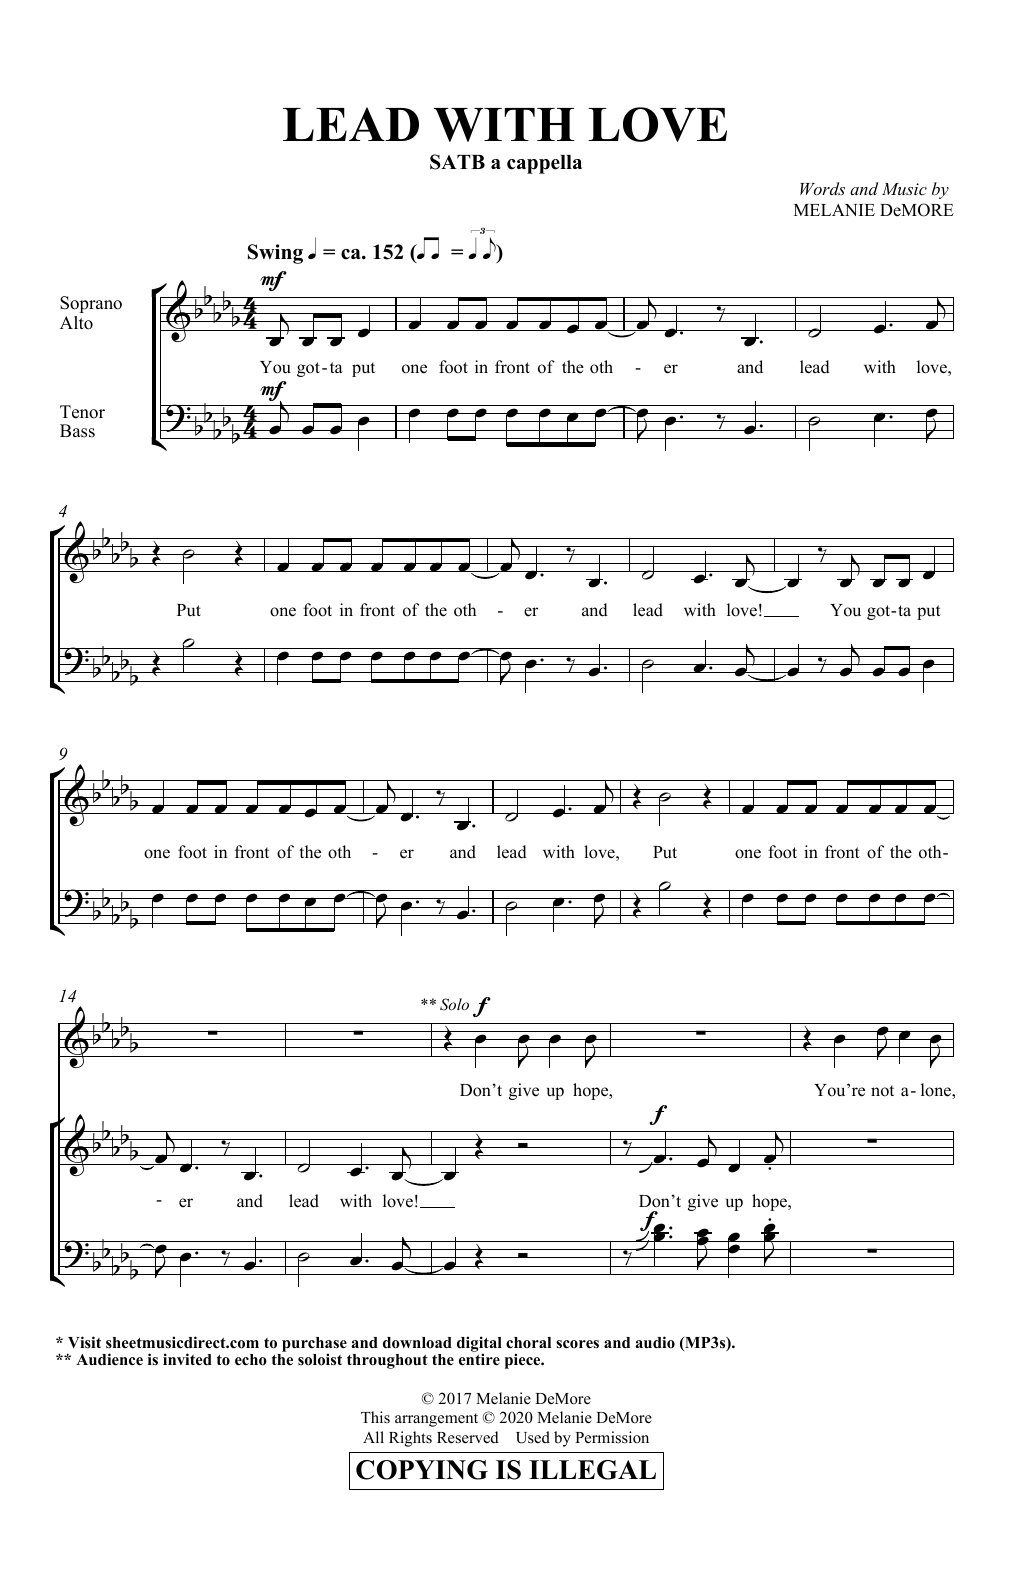 Download Melanie DeMore Lead With Love Sheet Music